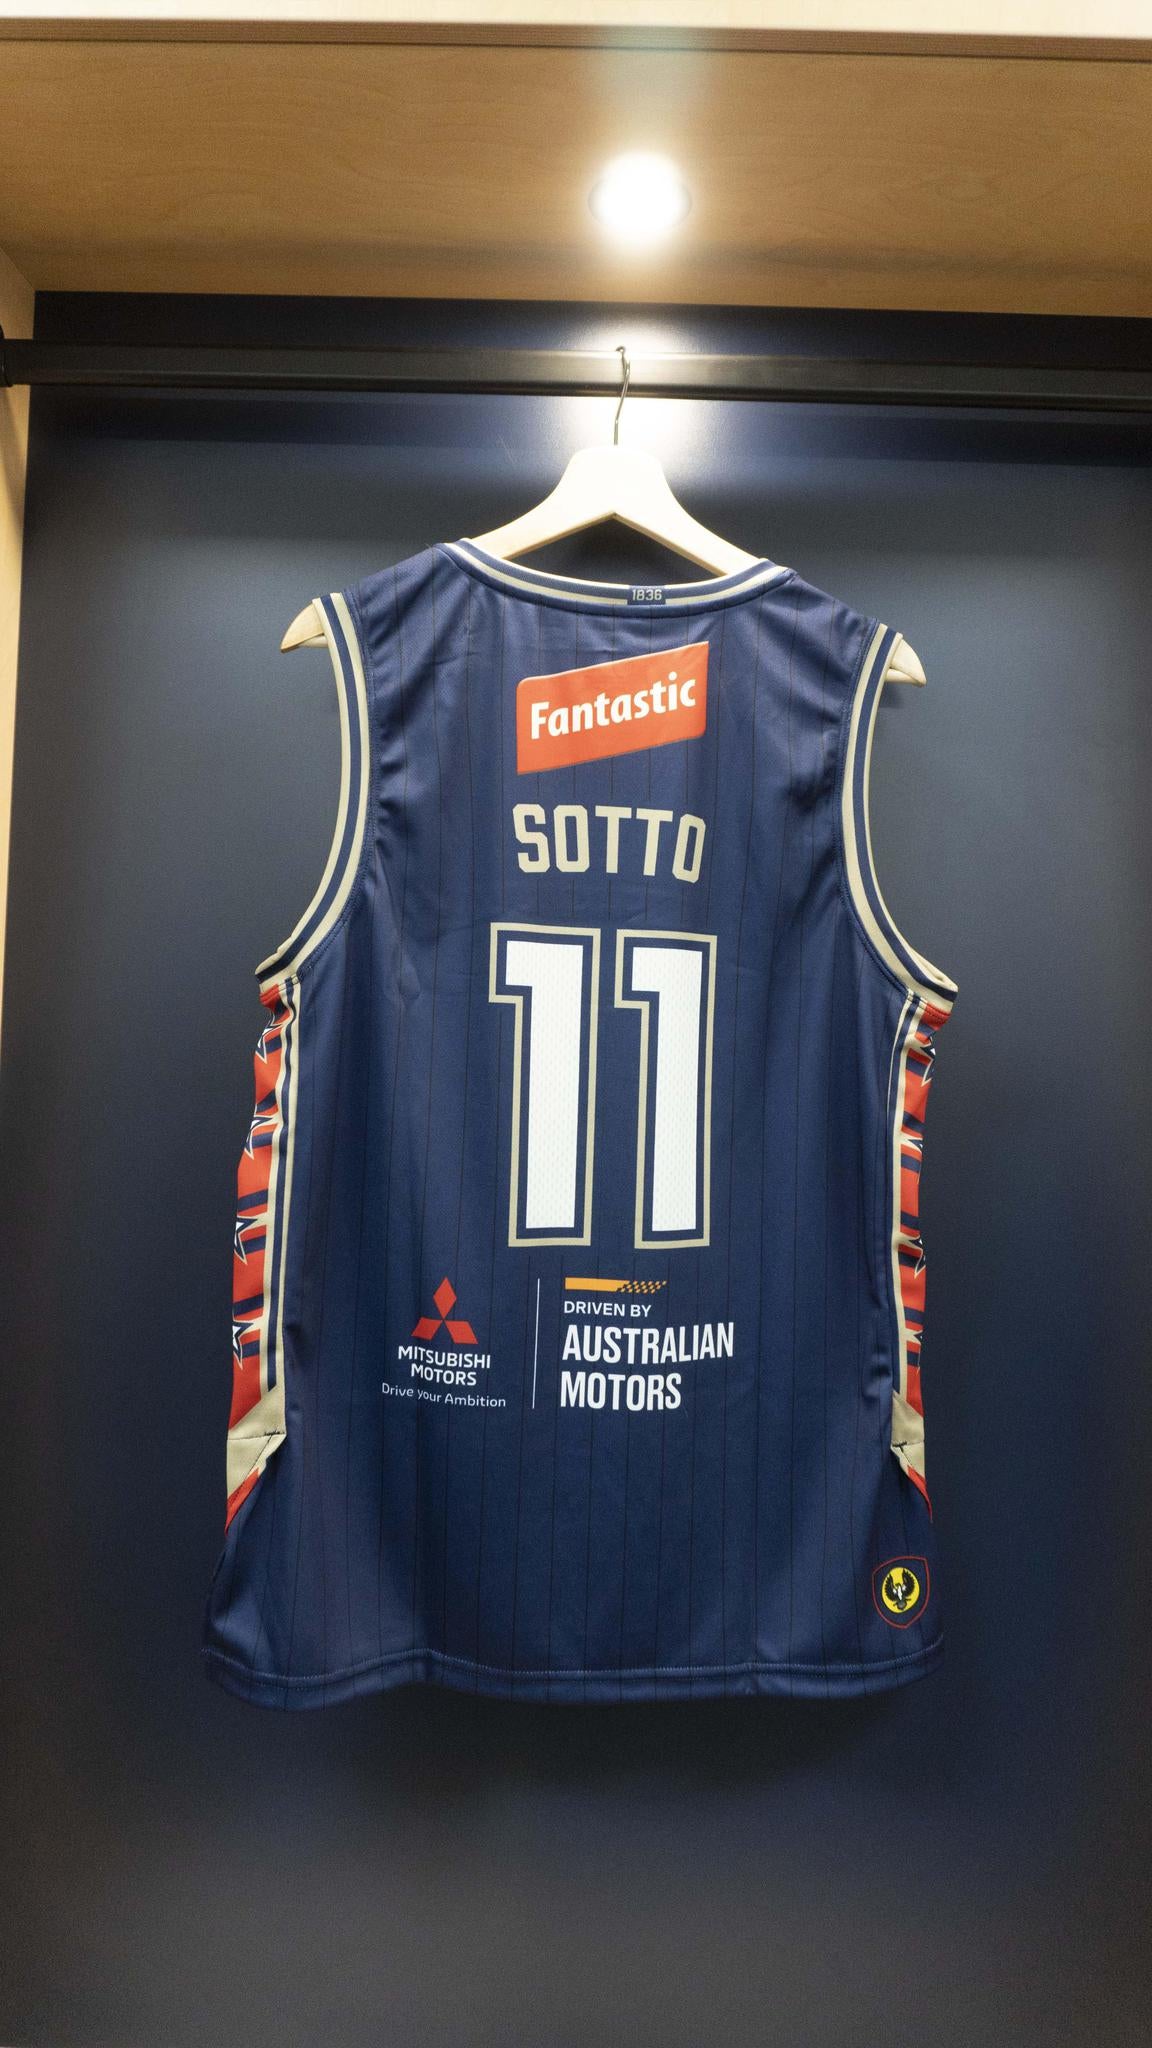 Adelaide 36ers 2021/22 Authentic Adult Home Jersey - Kai Sotto